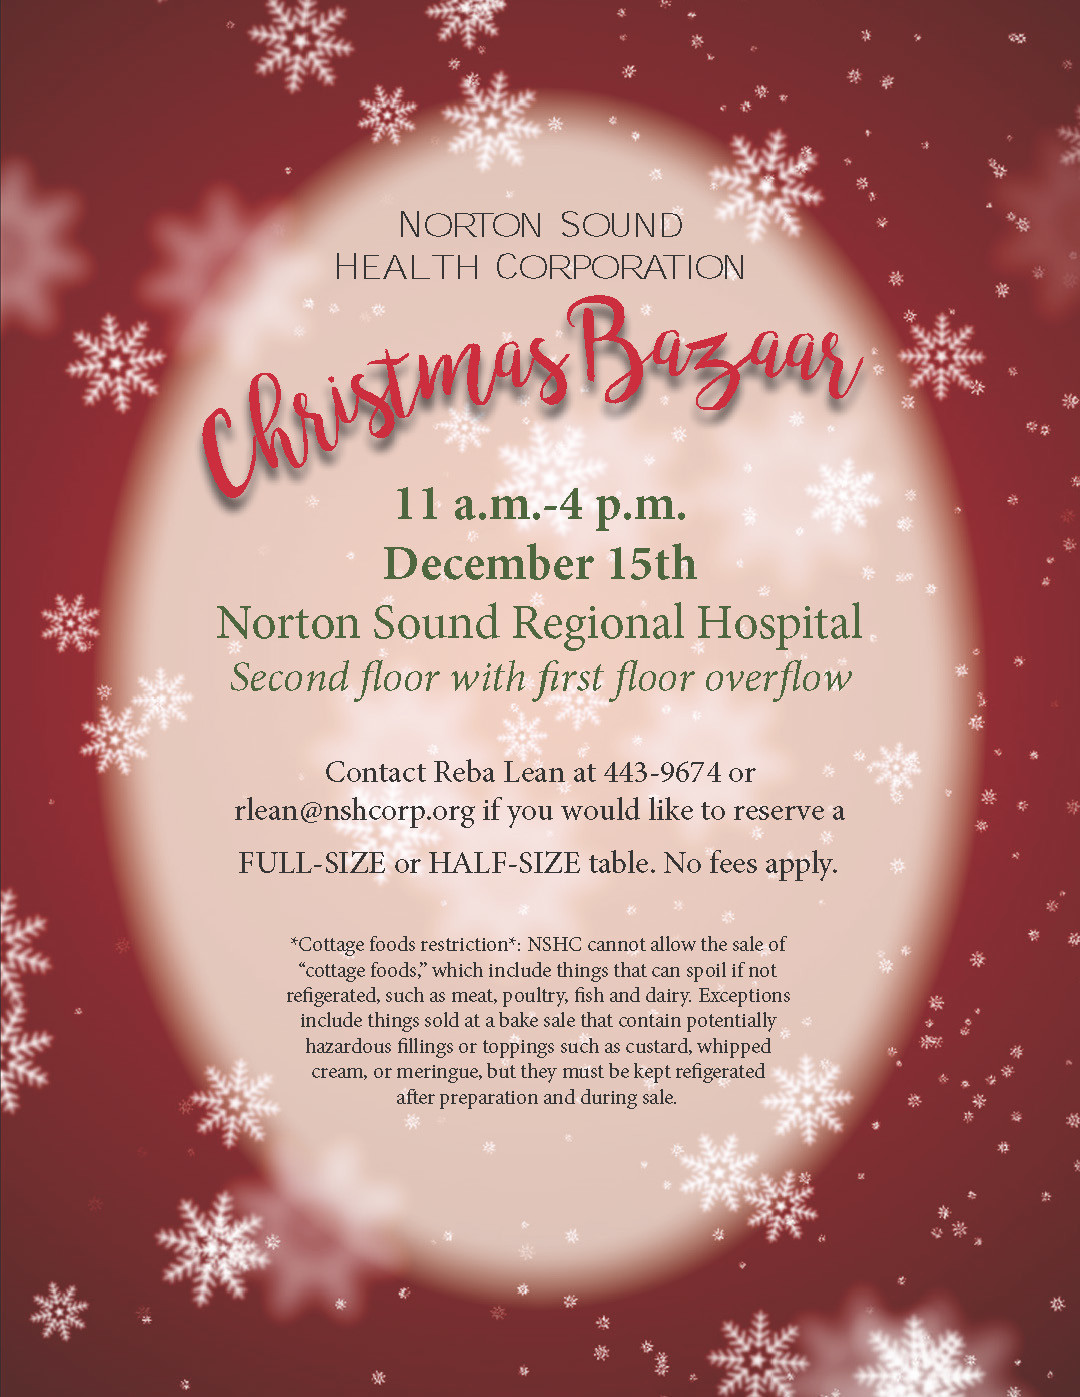 Norton Sound Health Corporation Christmas Bazaar 11 am - 4 pm December 15th Norton Sound Regioal Hospital Second floor with first floor overflow Contact Reba Lean at 443-9674 or rlean@nshcorp.org if you would like to reserve a FULL-SIZE or HALF-SIZE table. No fees apply. *Cottage foods restriction*: NSHC cannot allow the sale of "cottage foods", which include things that can spoil if not refrigerated, such as meat, poultry, fish, and dairy. Exceptions include things sold at a bake sale that contain potentially hazardous fillings or toppings such as custard, whipped cream, or meringue, but they must be kept refrigerated after preparation and during sale.